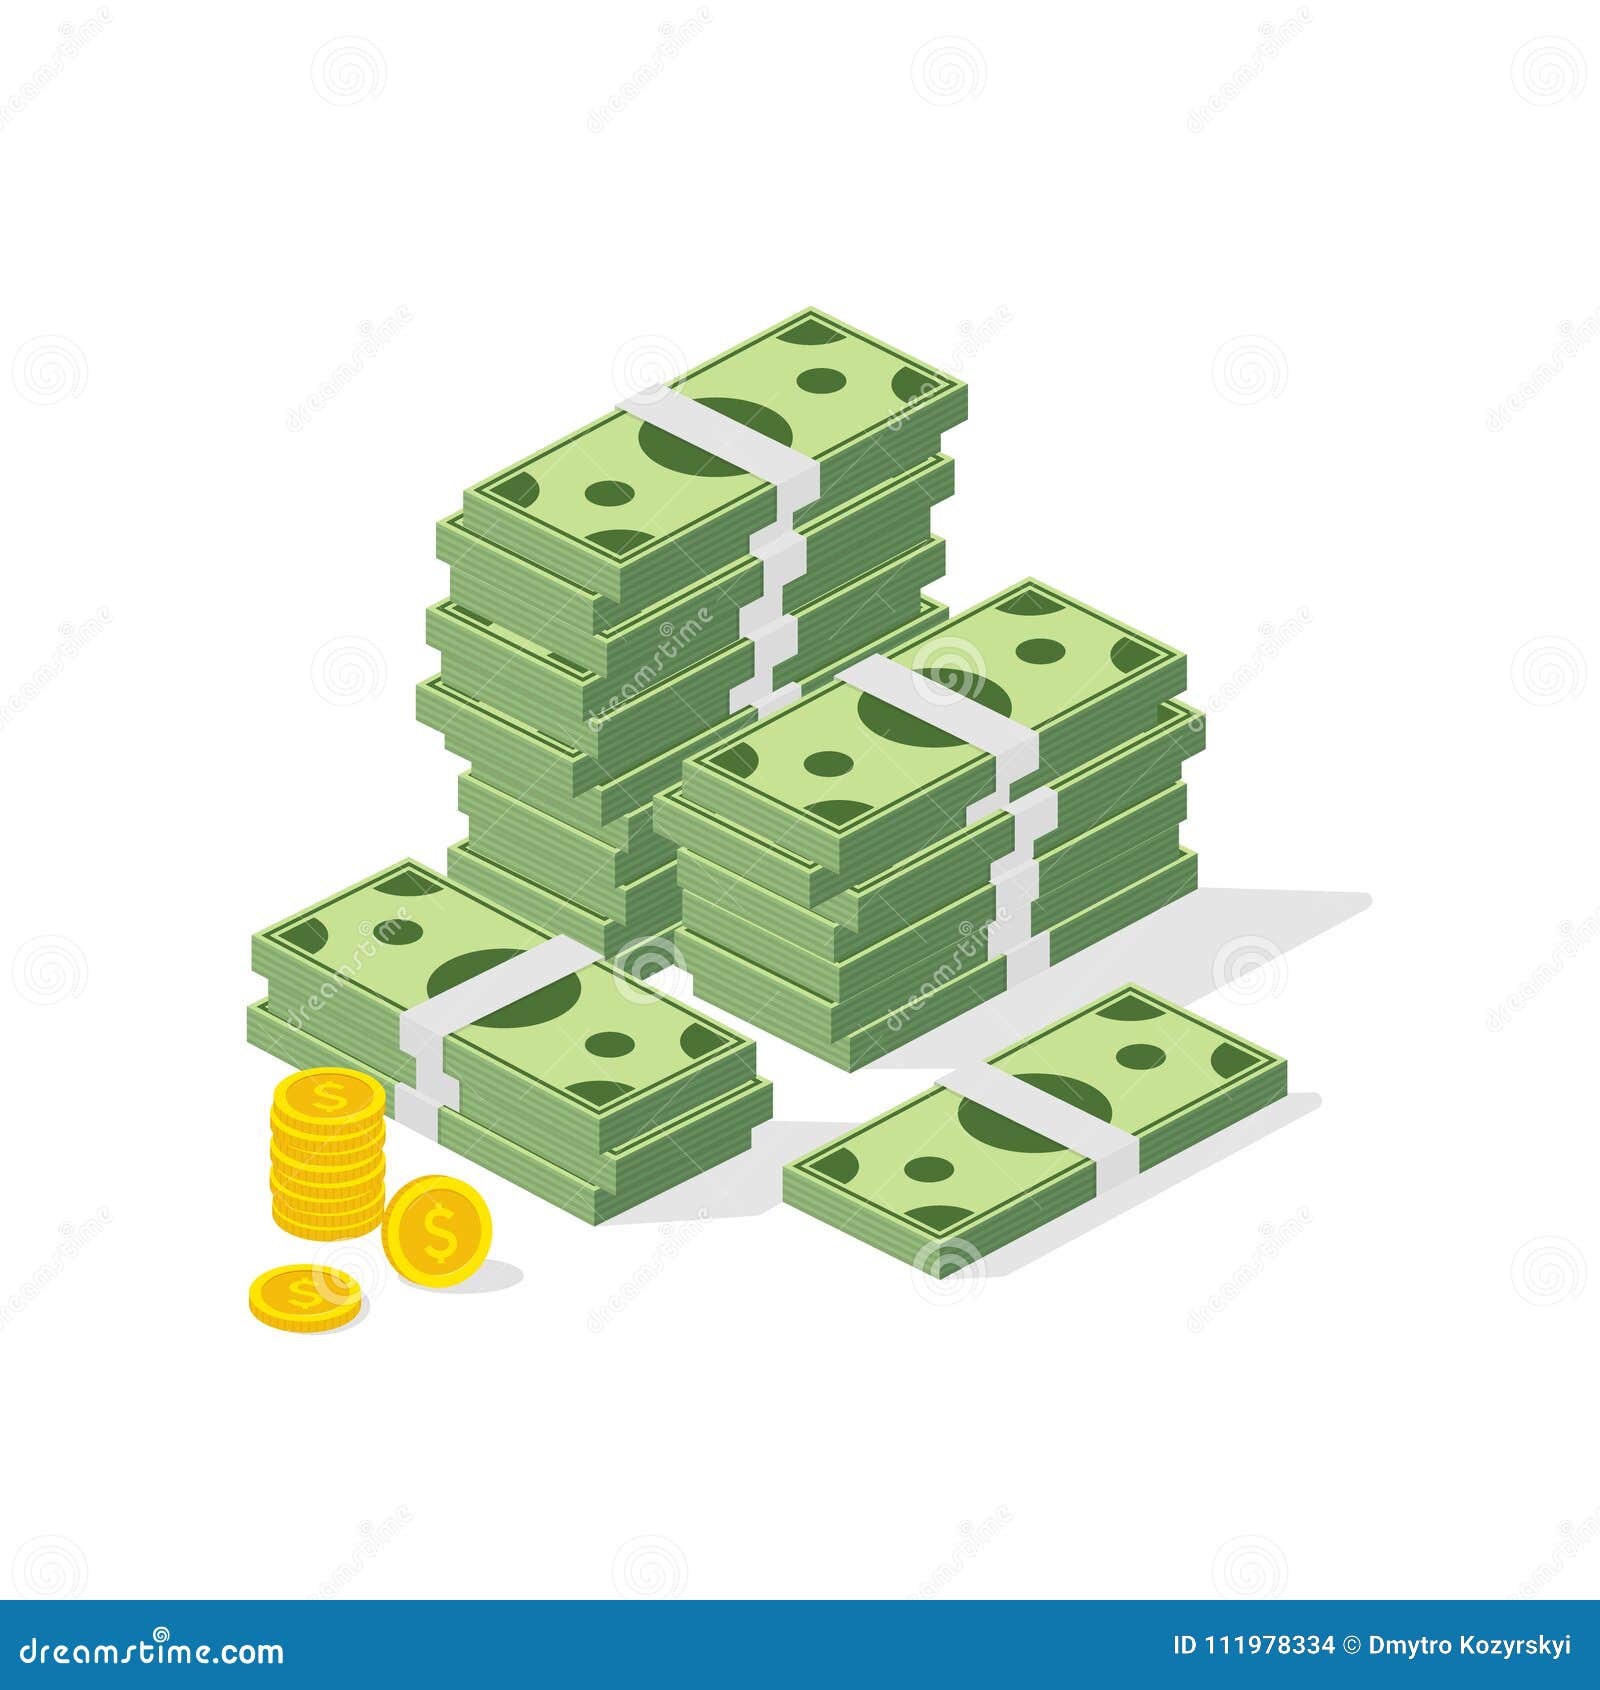 big pile of cash. concept of big money. hundreds of dollars and coins.  isometric .